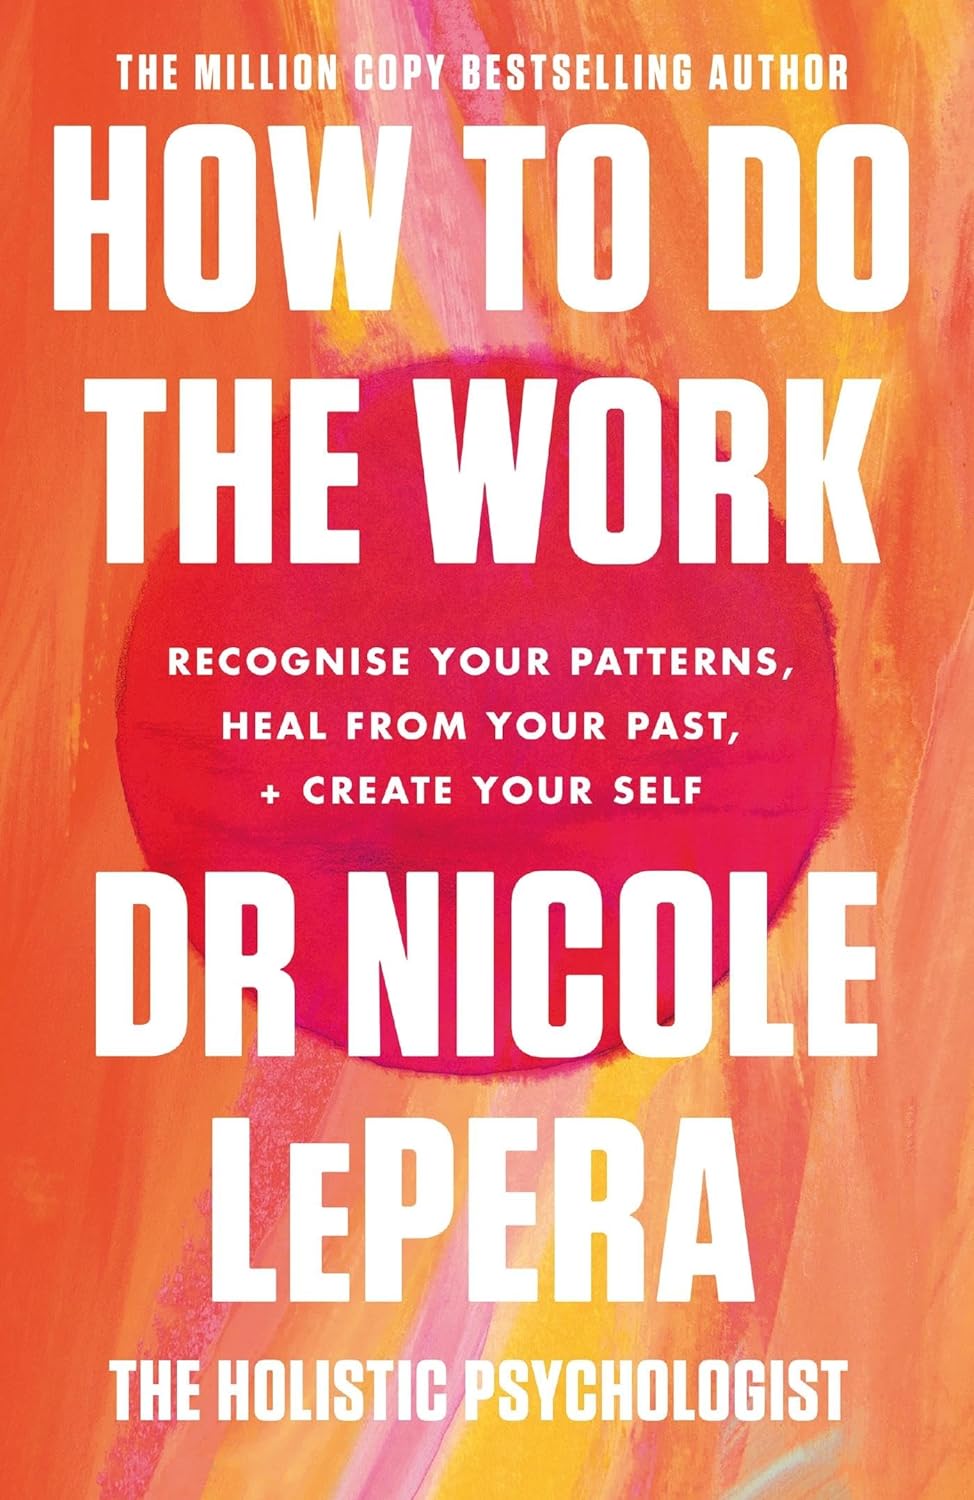 How To Do The Work - Recognise Your Patterns, Heal from Your Past, and Create Your Self